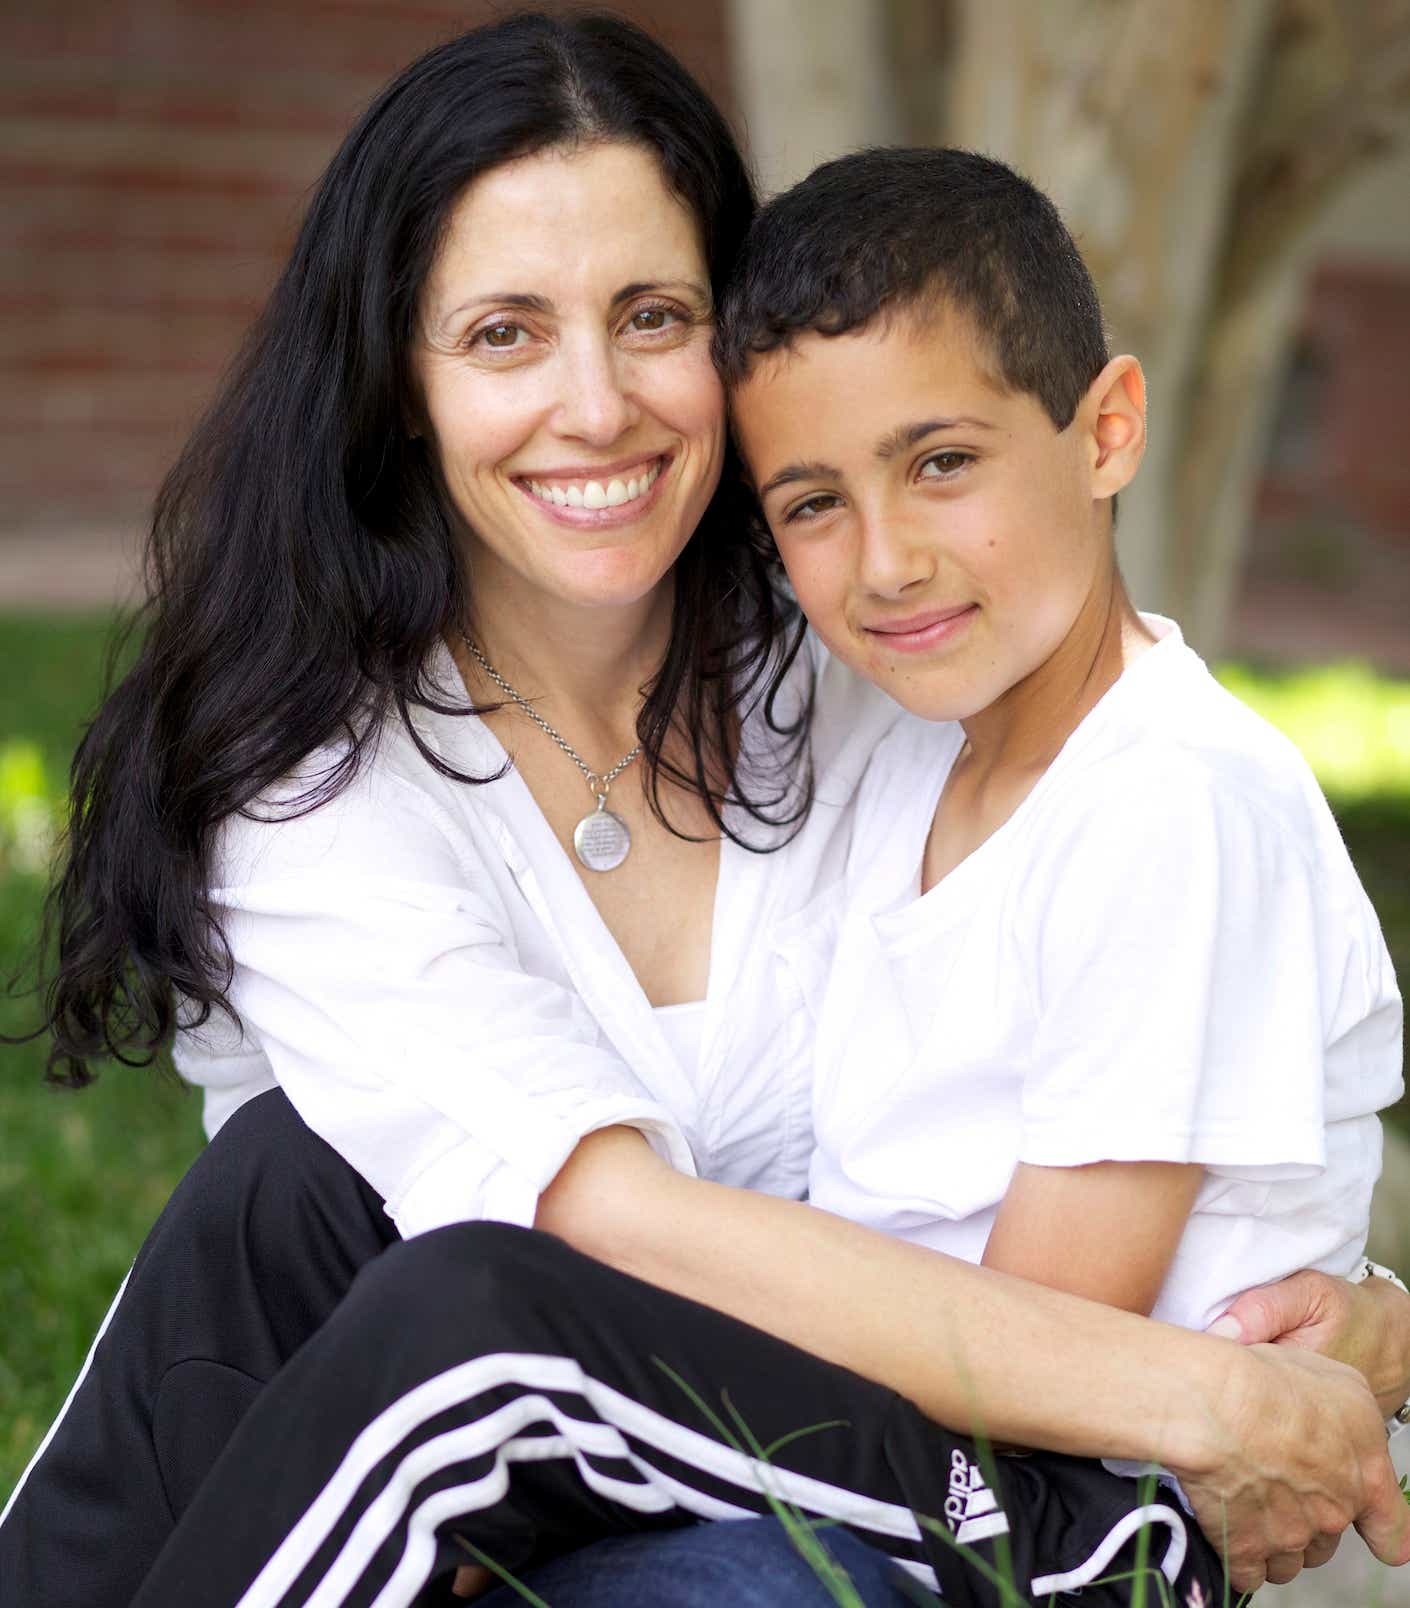 Nikki Mark and her son